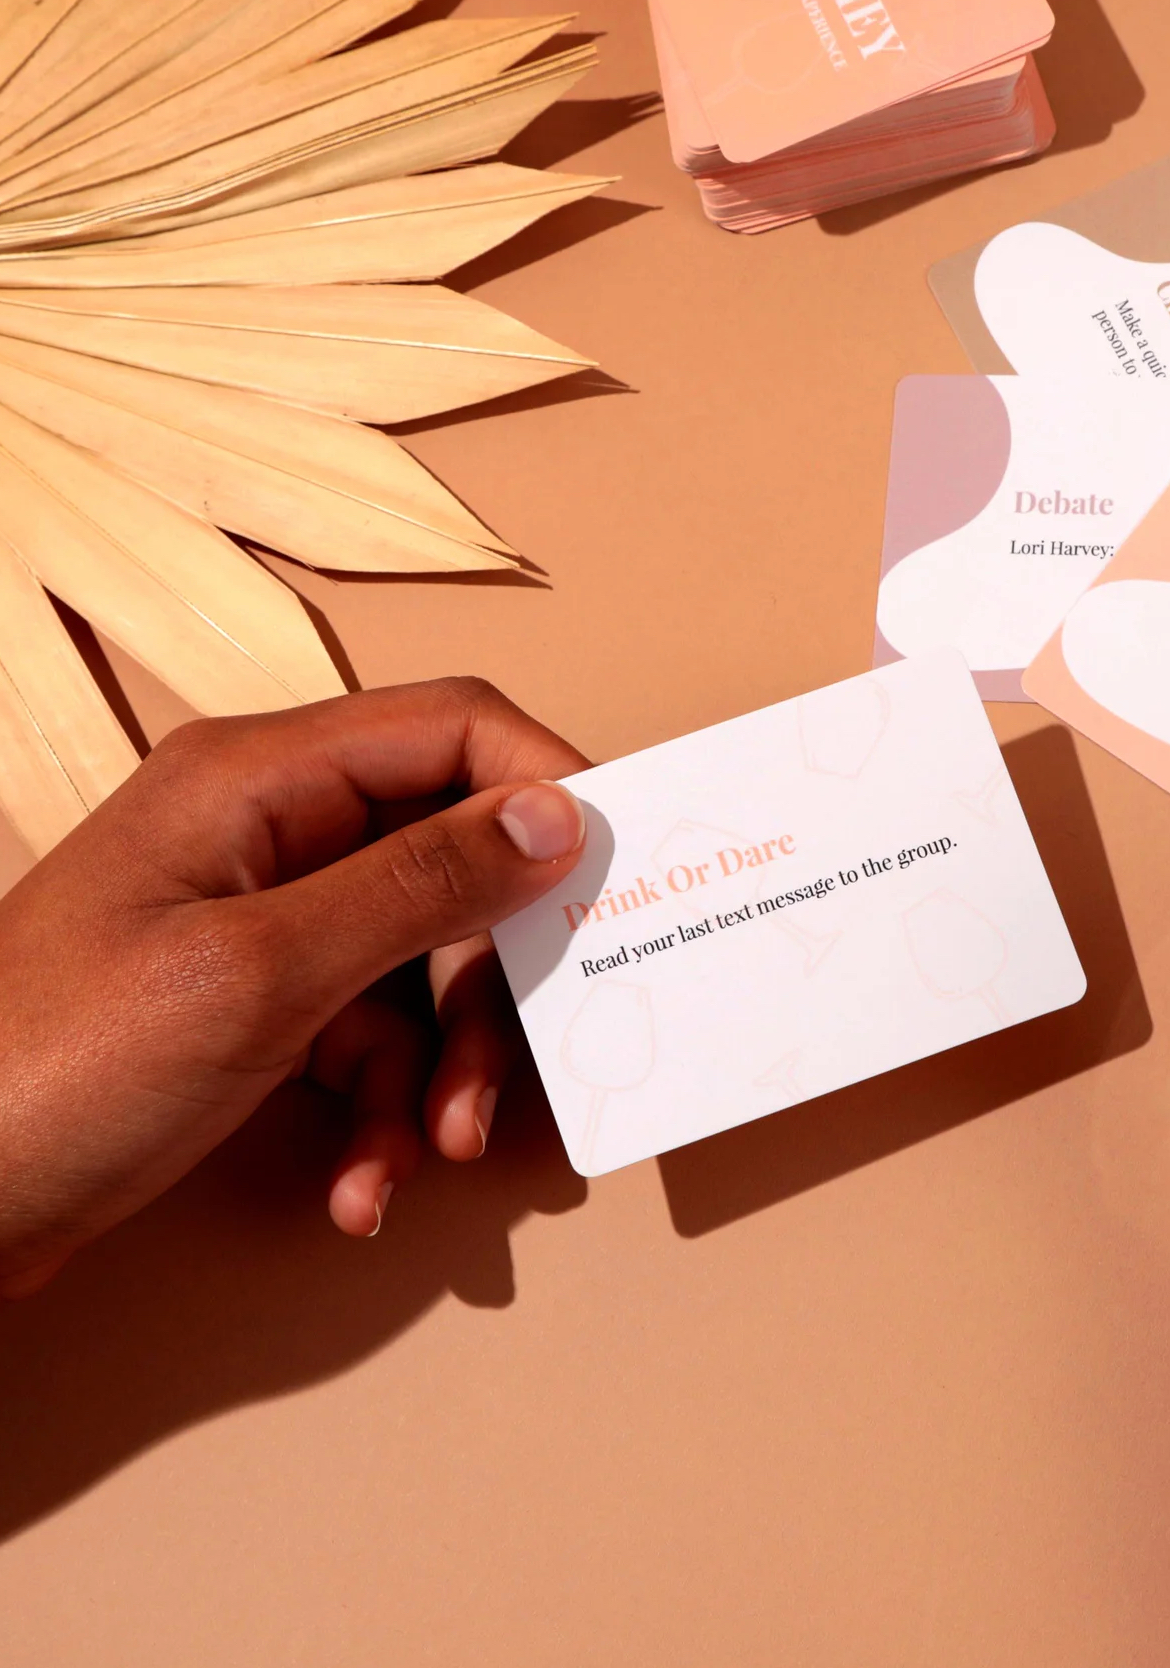 A hand holding a "drink or dare" card with the dare "read your last message to the group" against a backdrop of similar cards and palm leaves.